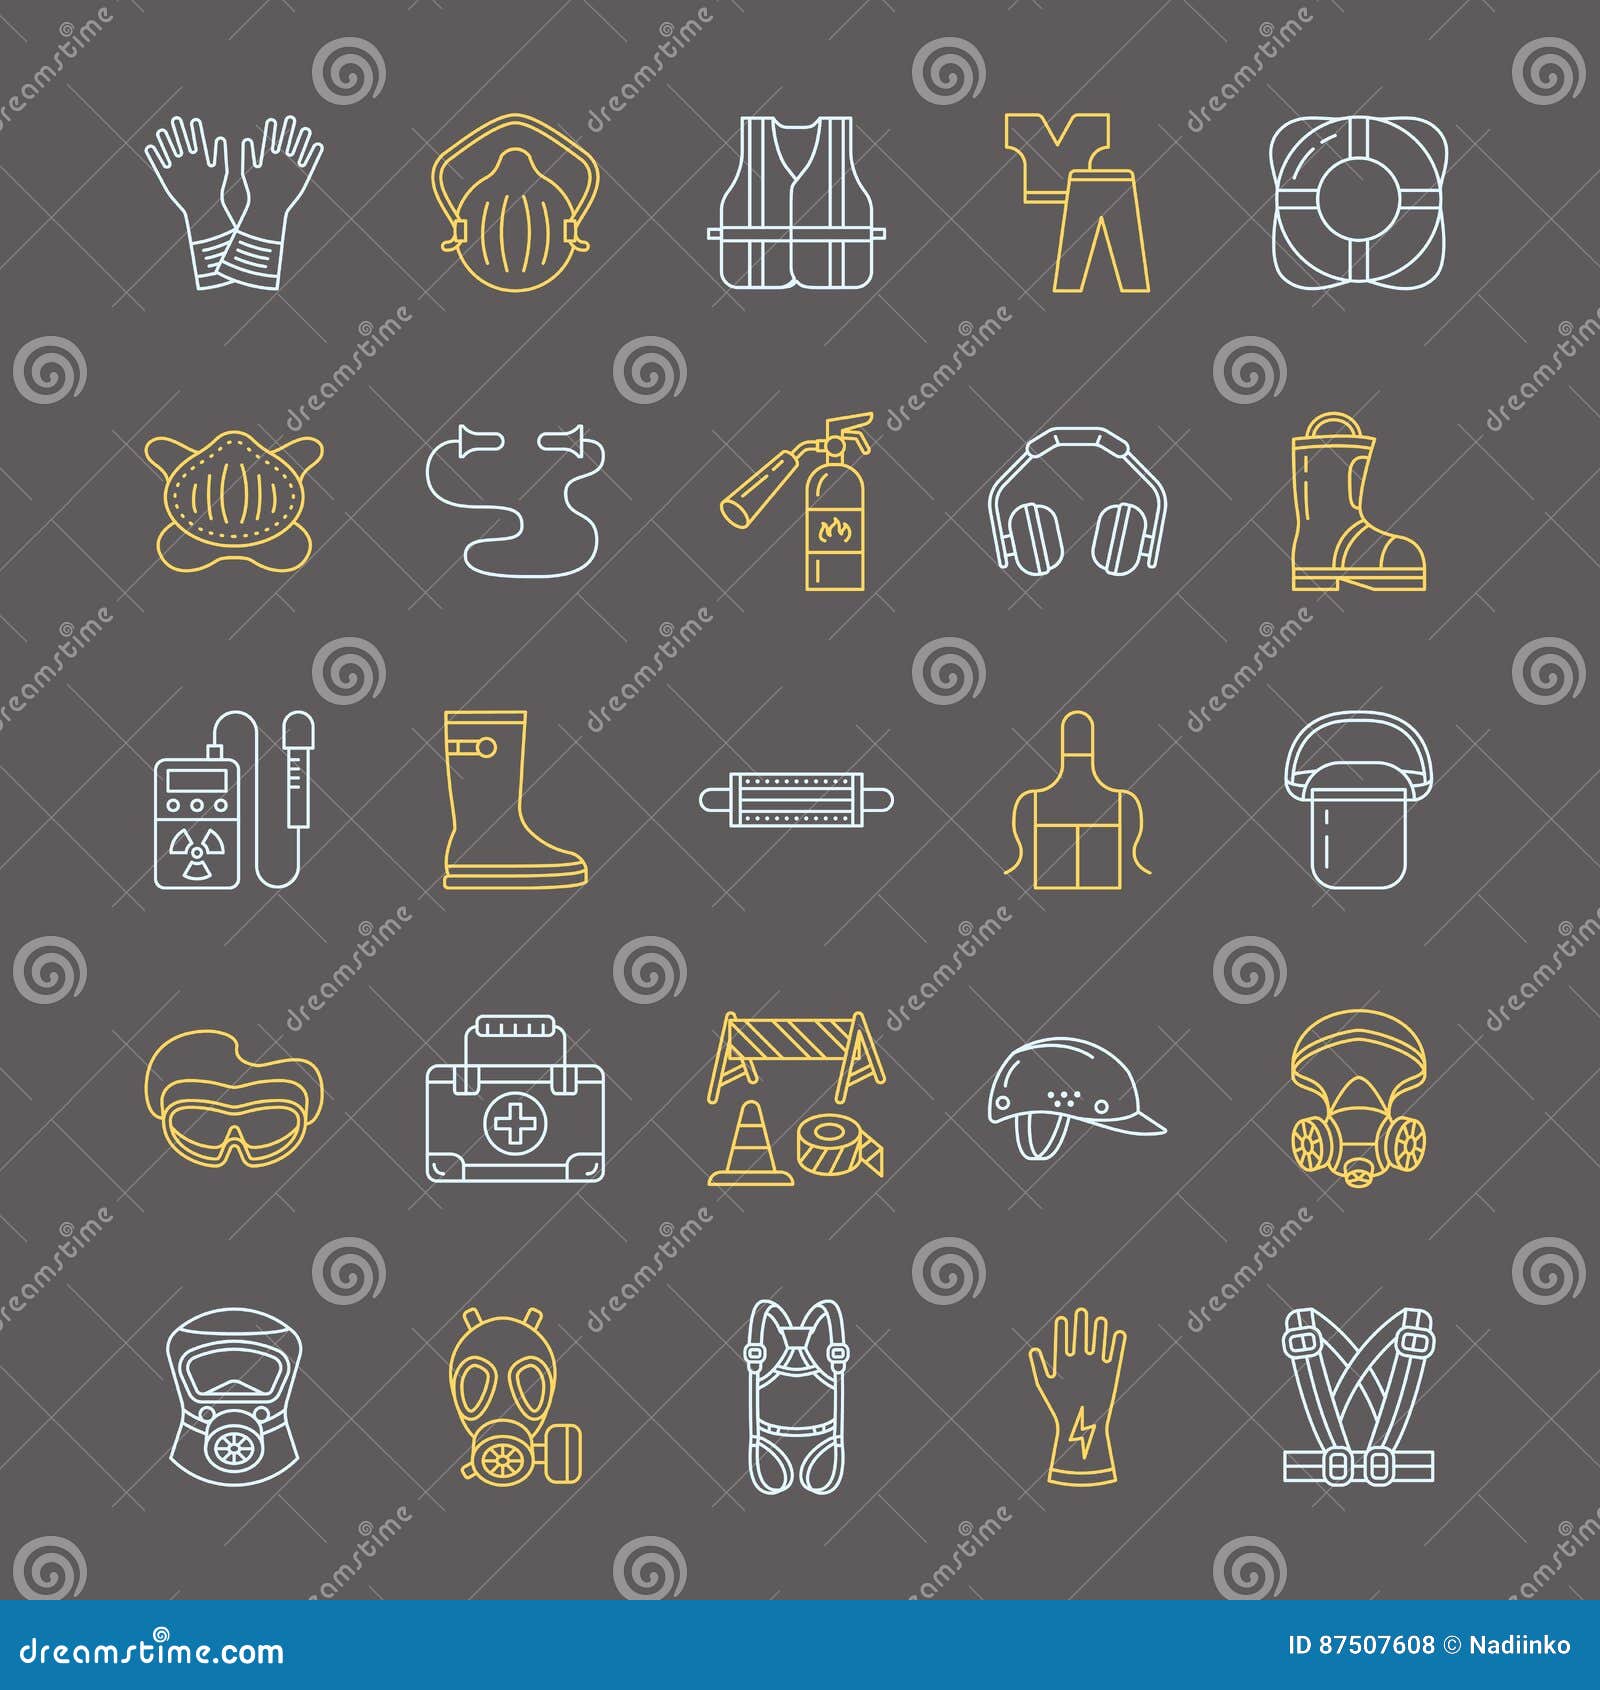 personal protective equipment line icons. gas mask, ring buoy, respirator, bump cap, ear plugs and safety work garment